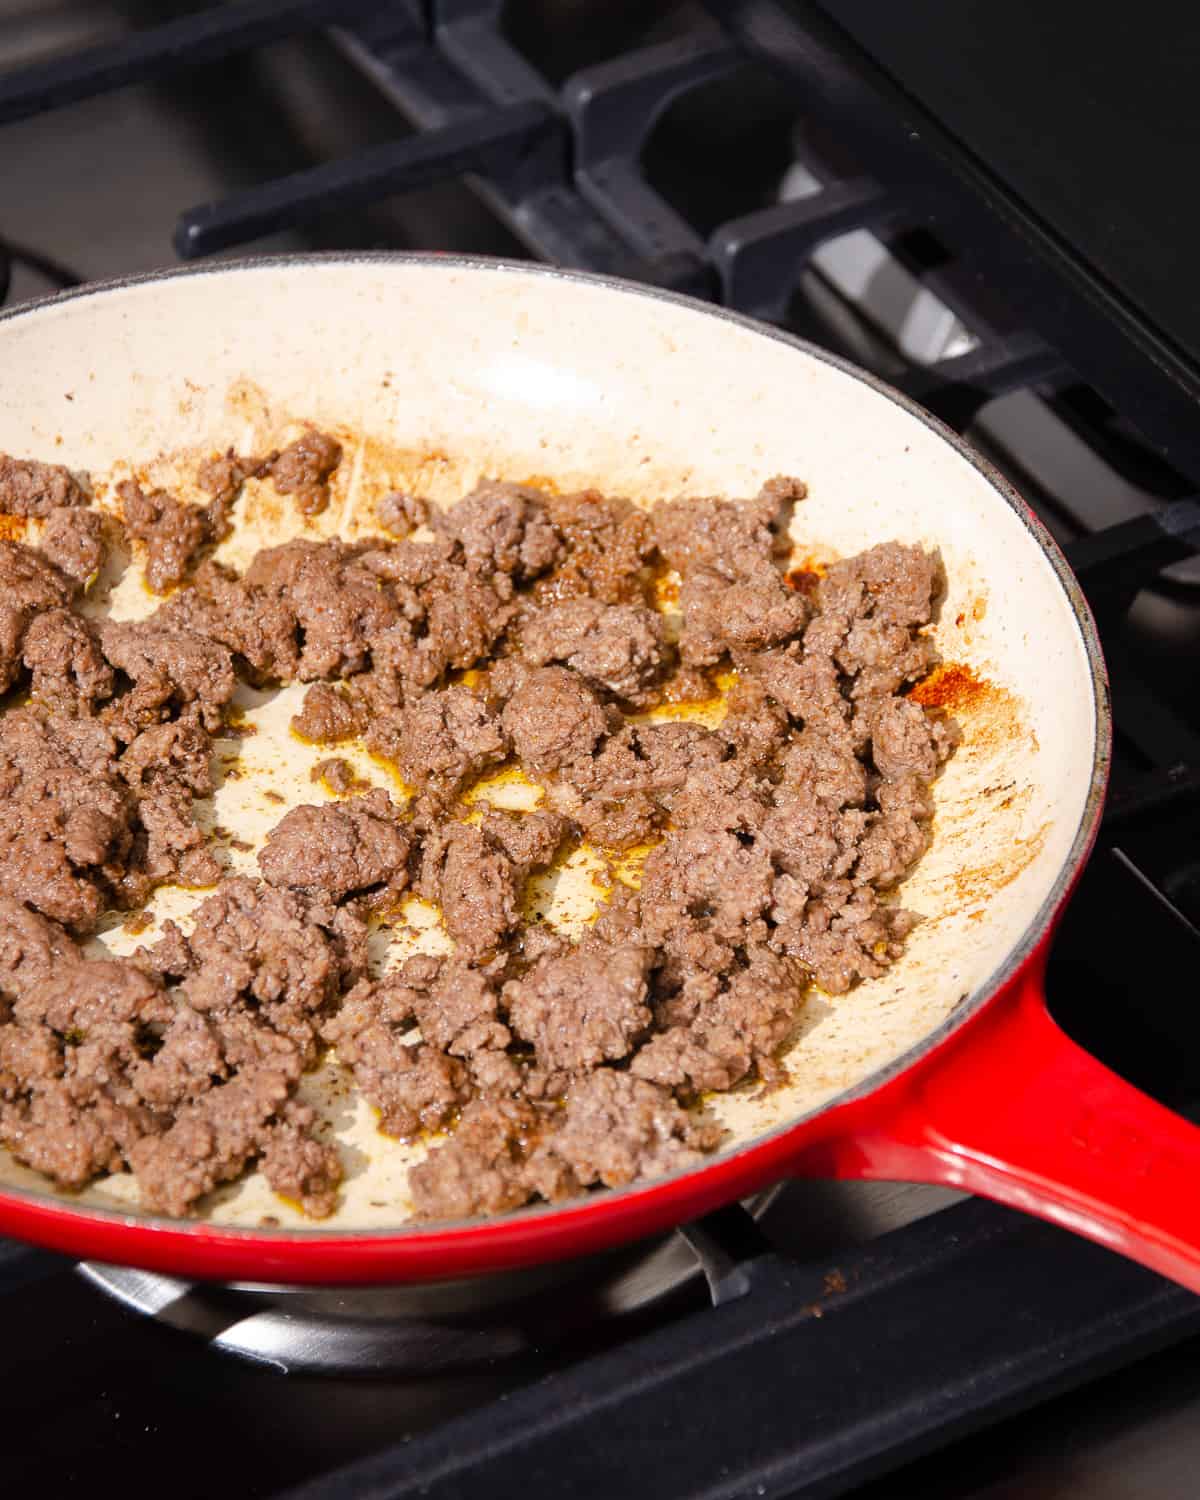 Browned ground beef in a red skillet.